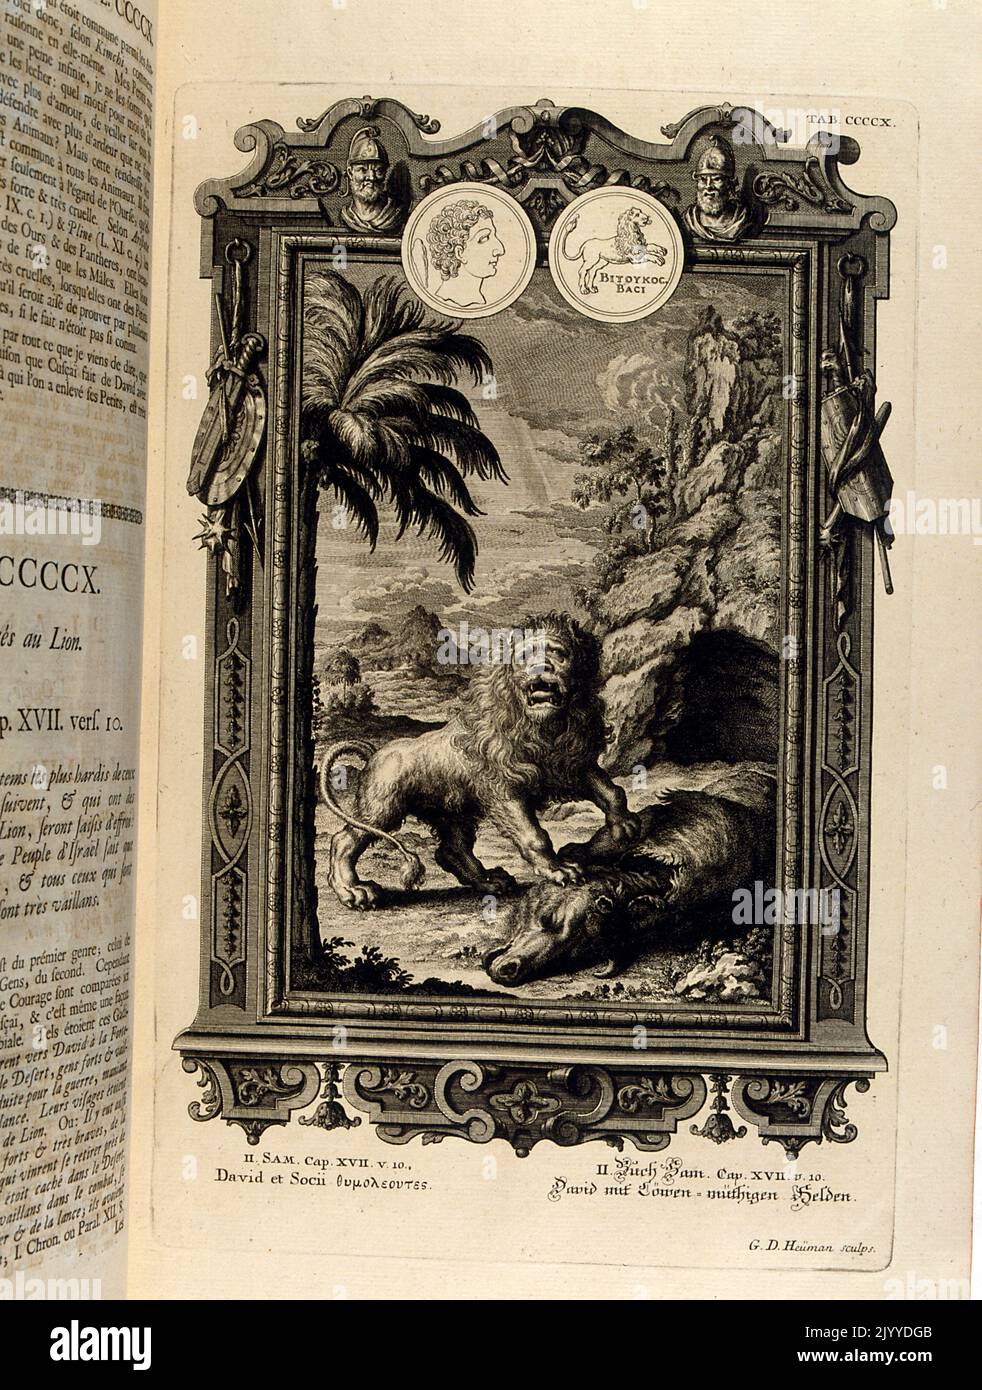 Engraving depicting a lion devouring a boar. The Illustration is set within an ornate frame. Stock Photo